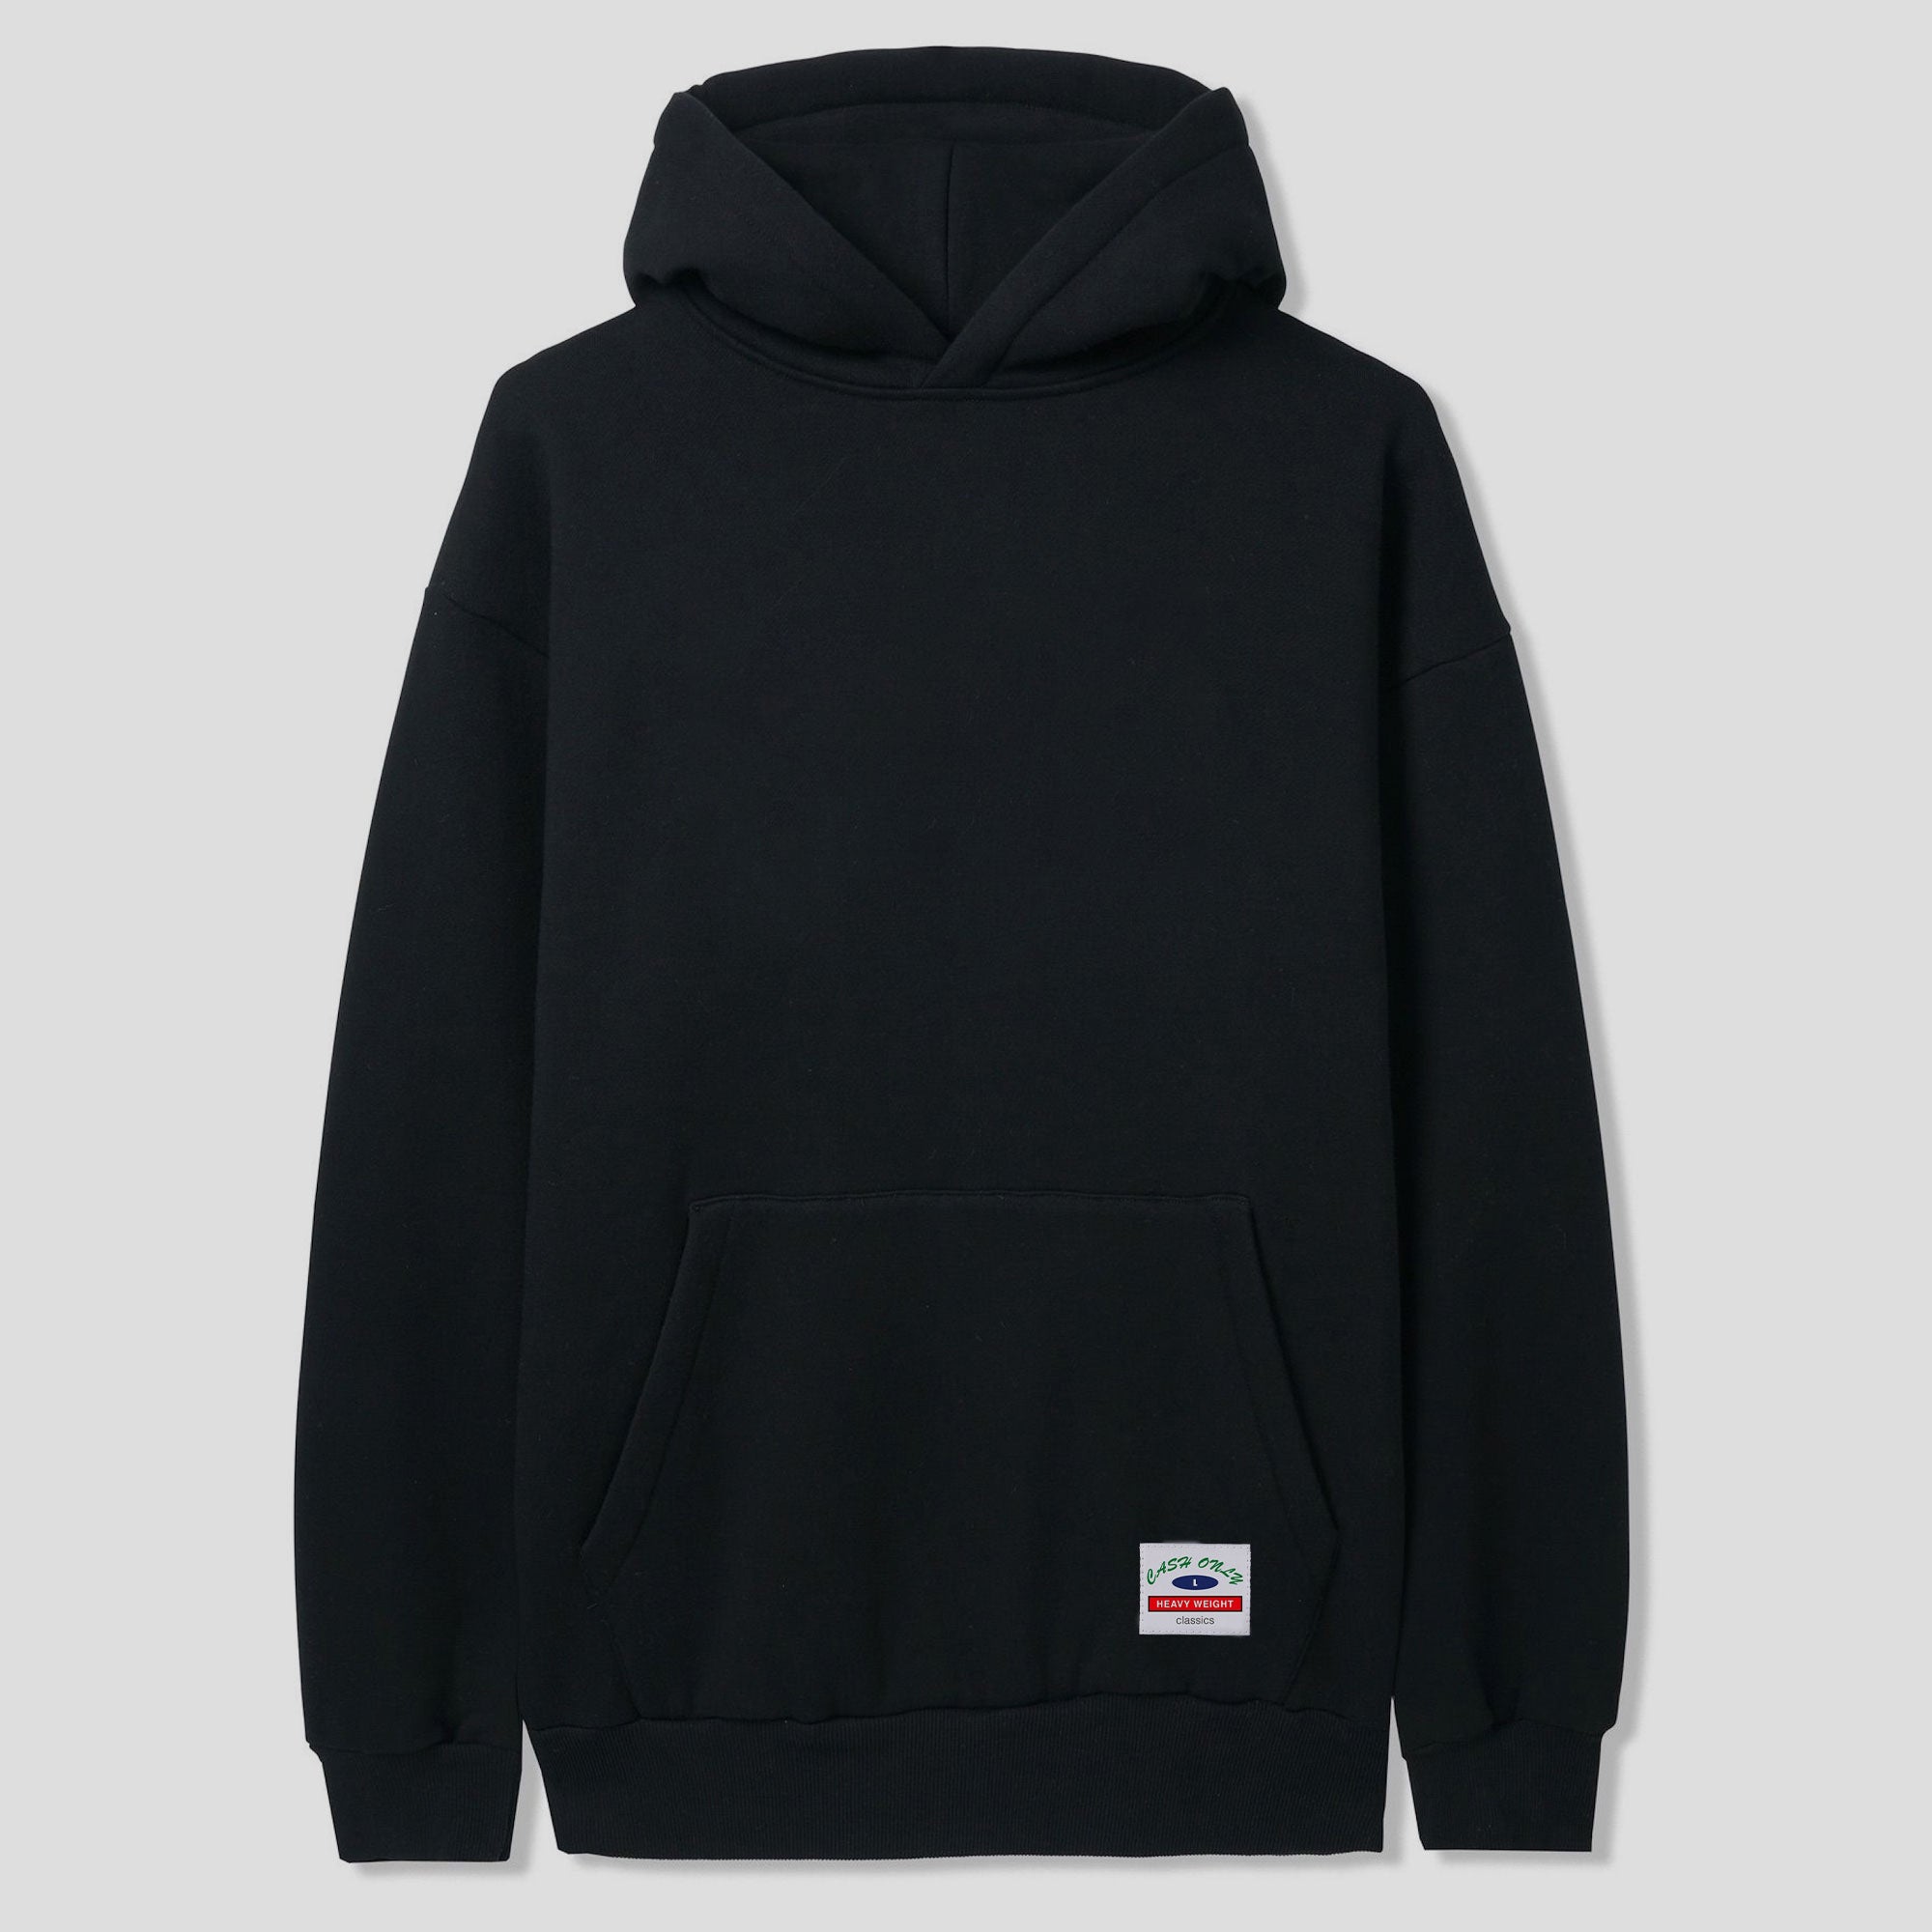 Cash Only Heavy Weight Basic Pullover Hood - Black